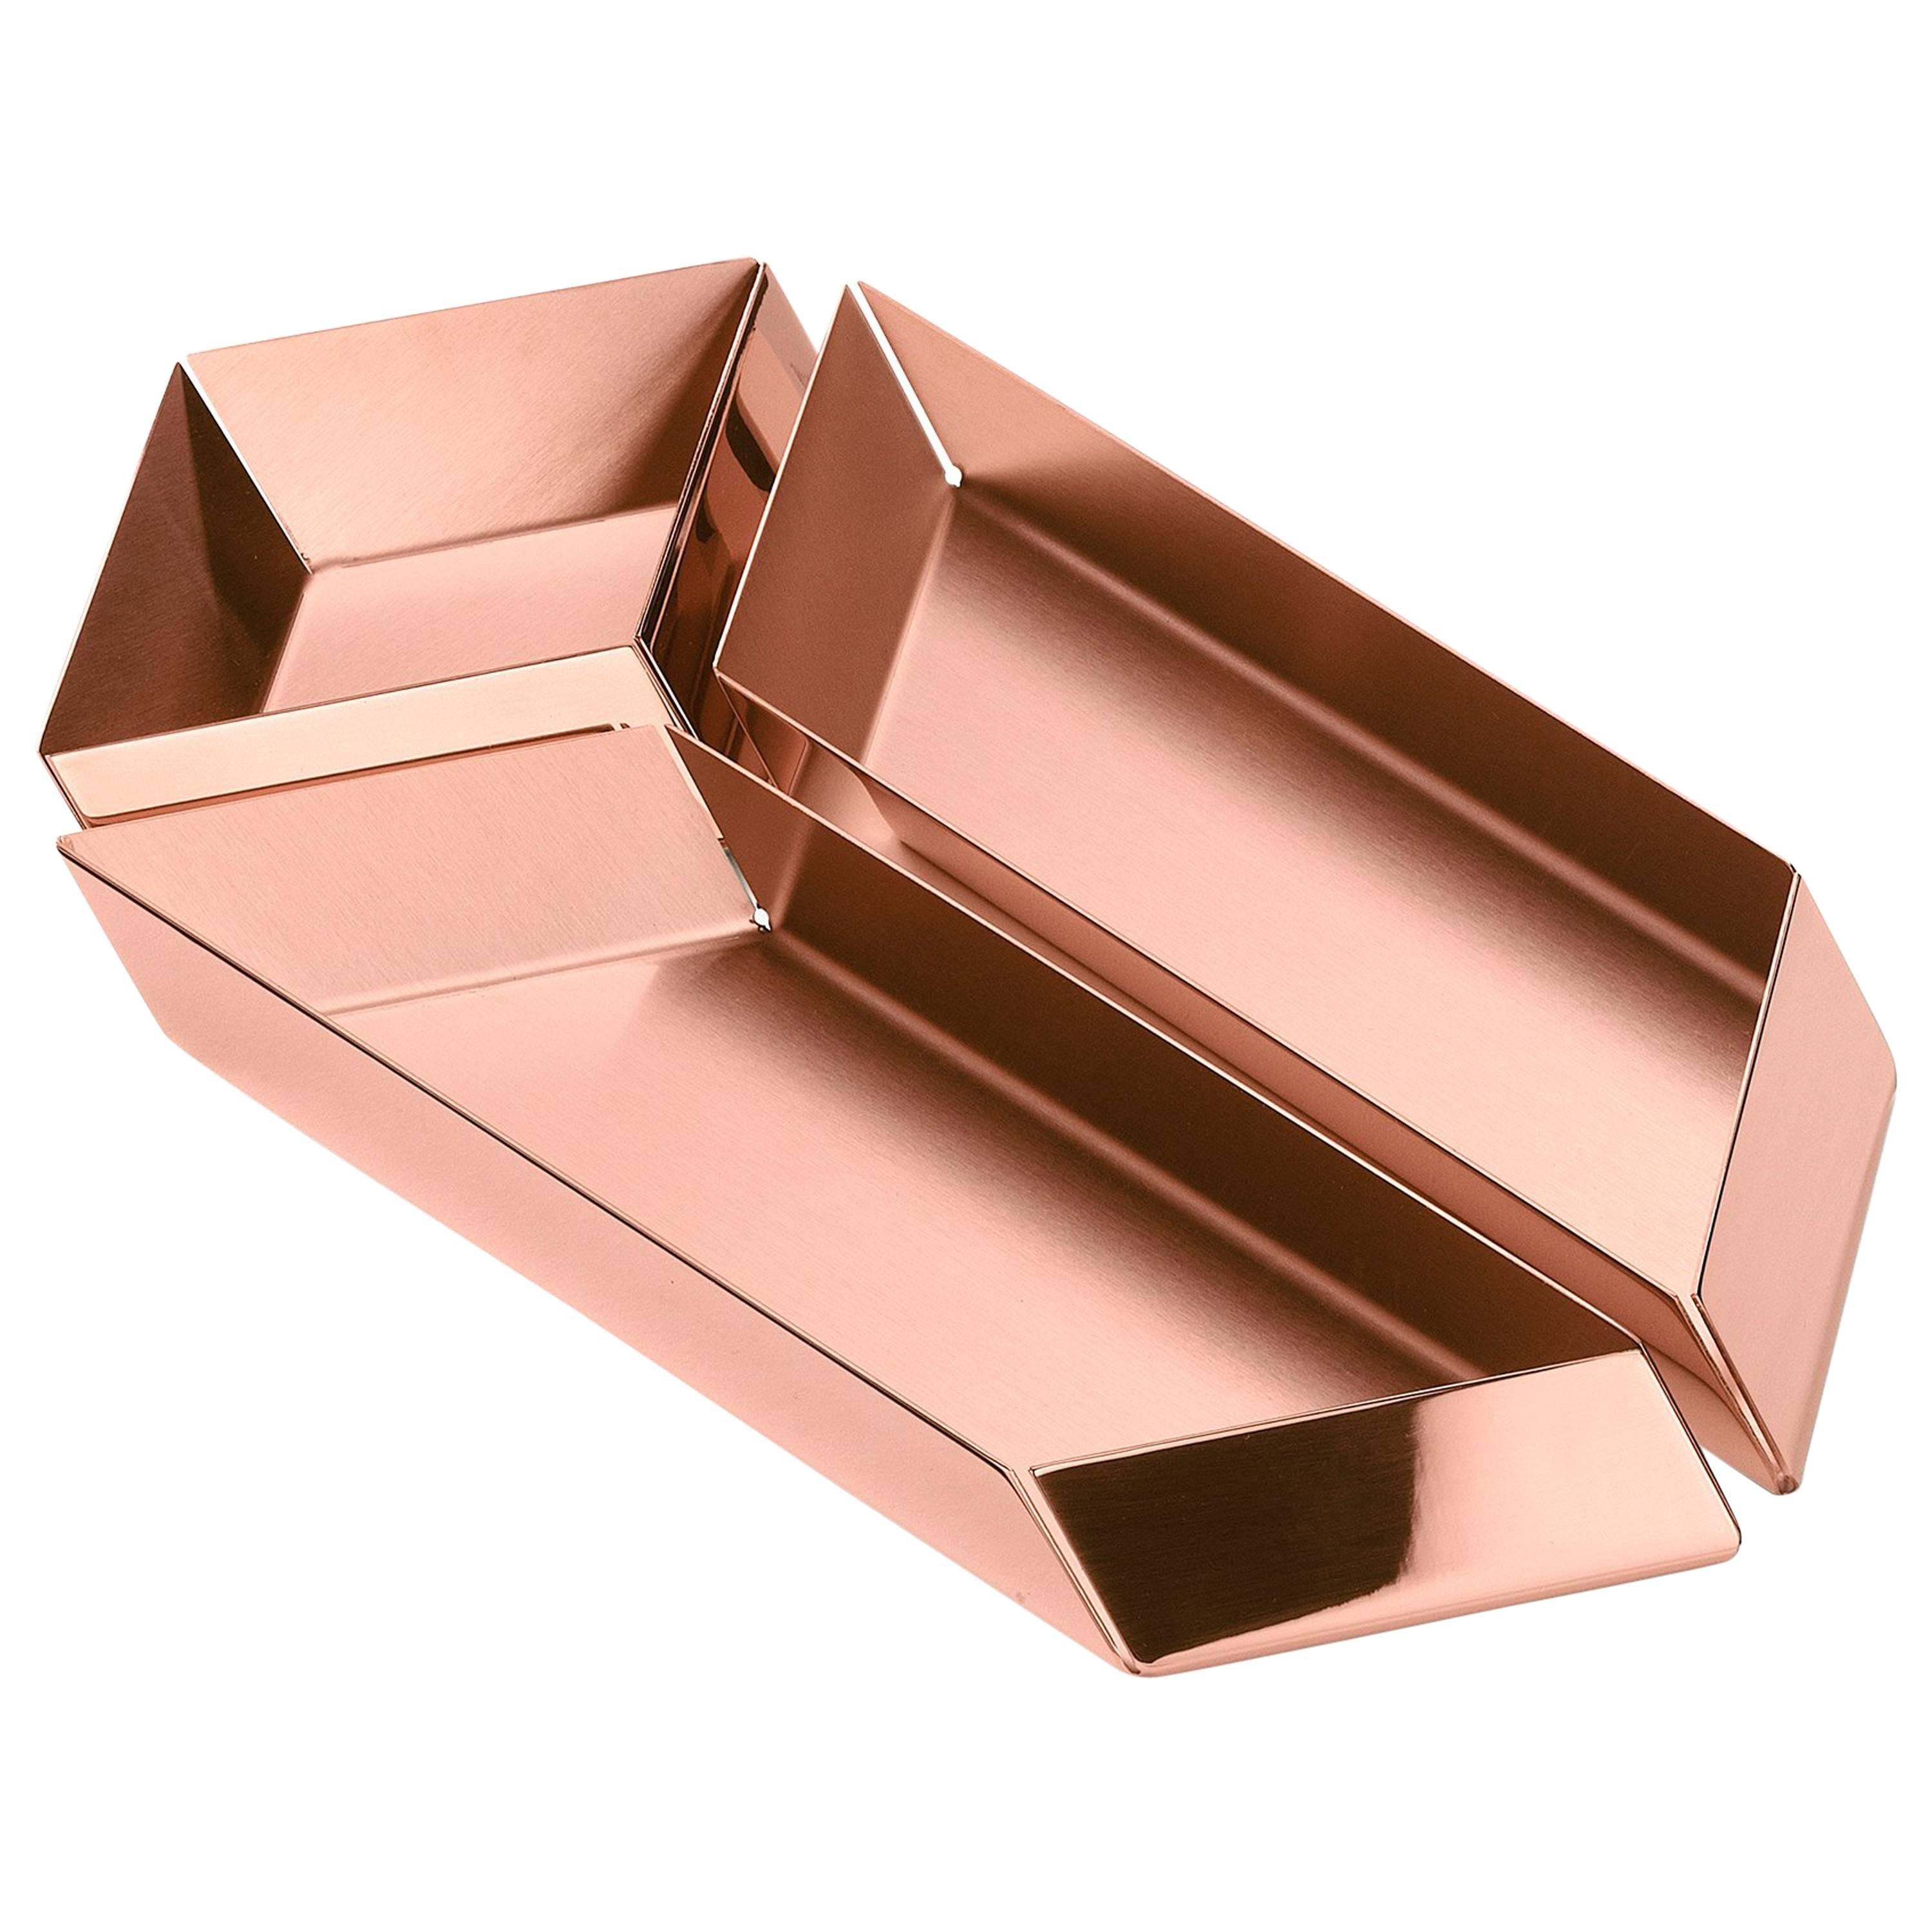 Ghidini 1961 Axonometry Set 3 Small Parallelepiped Tray Set in Rose Gold Finish